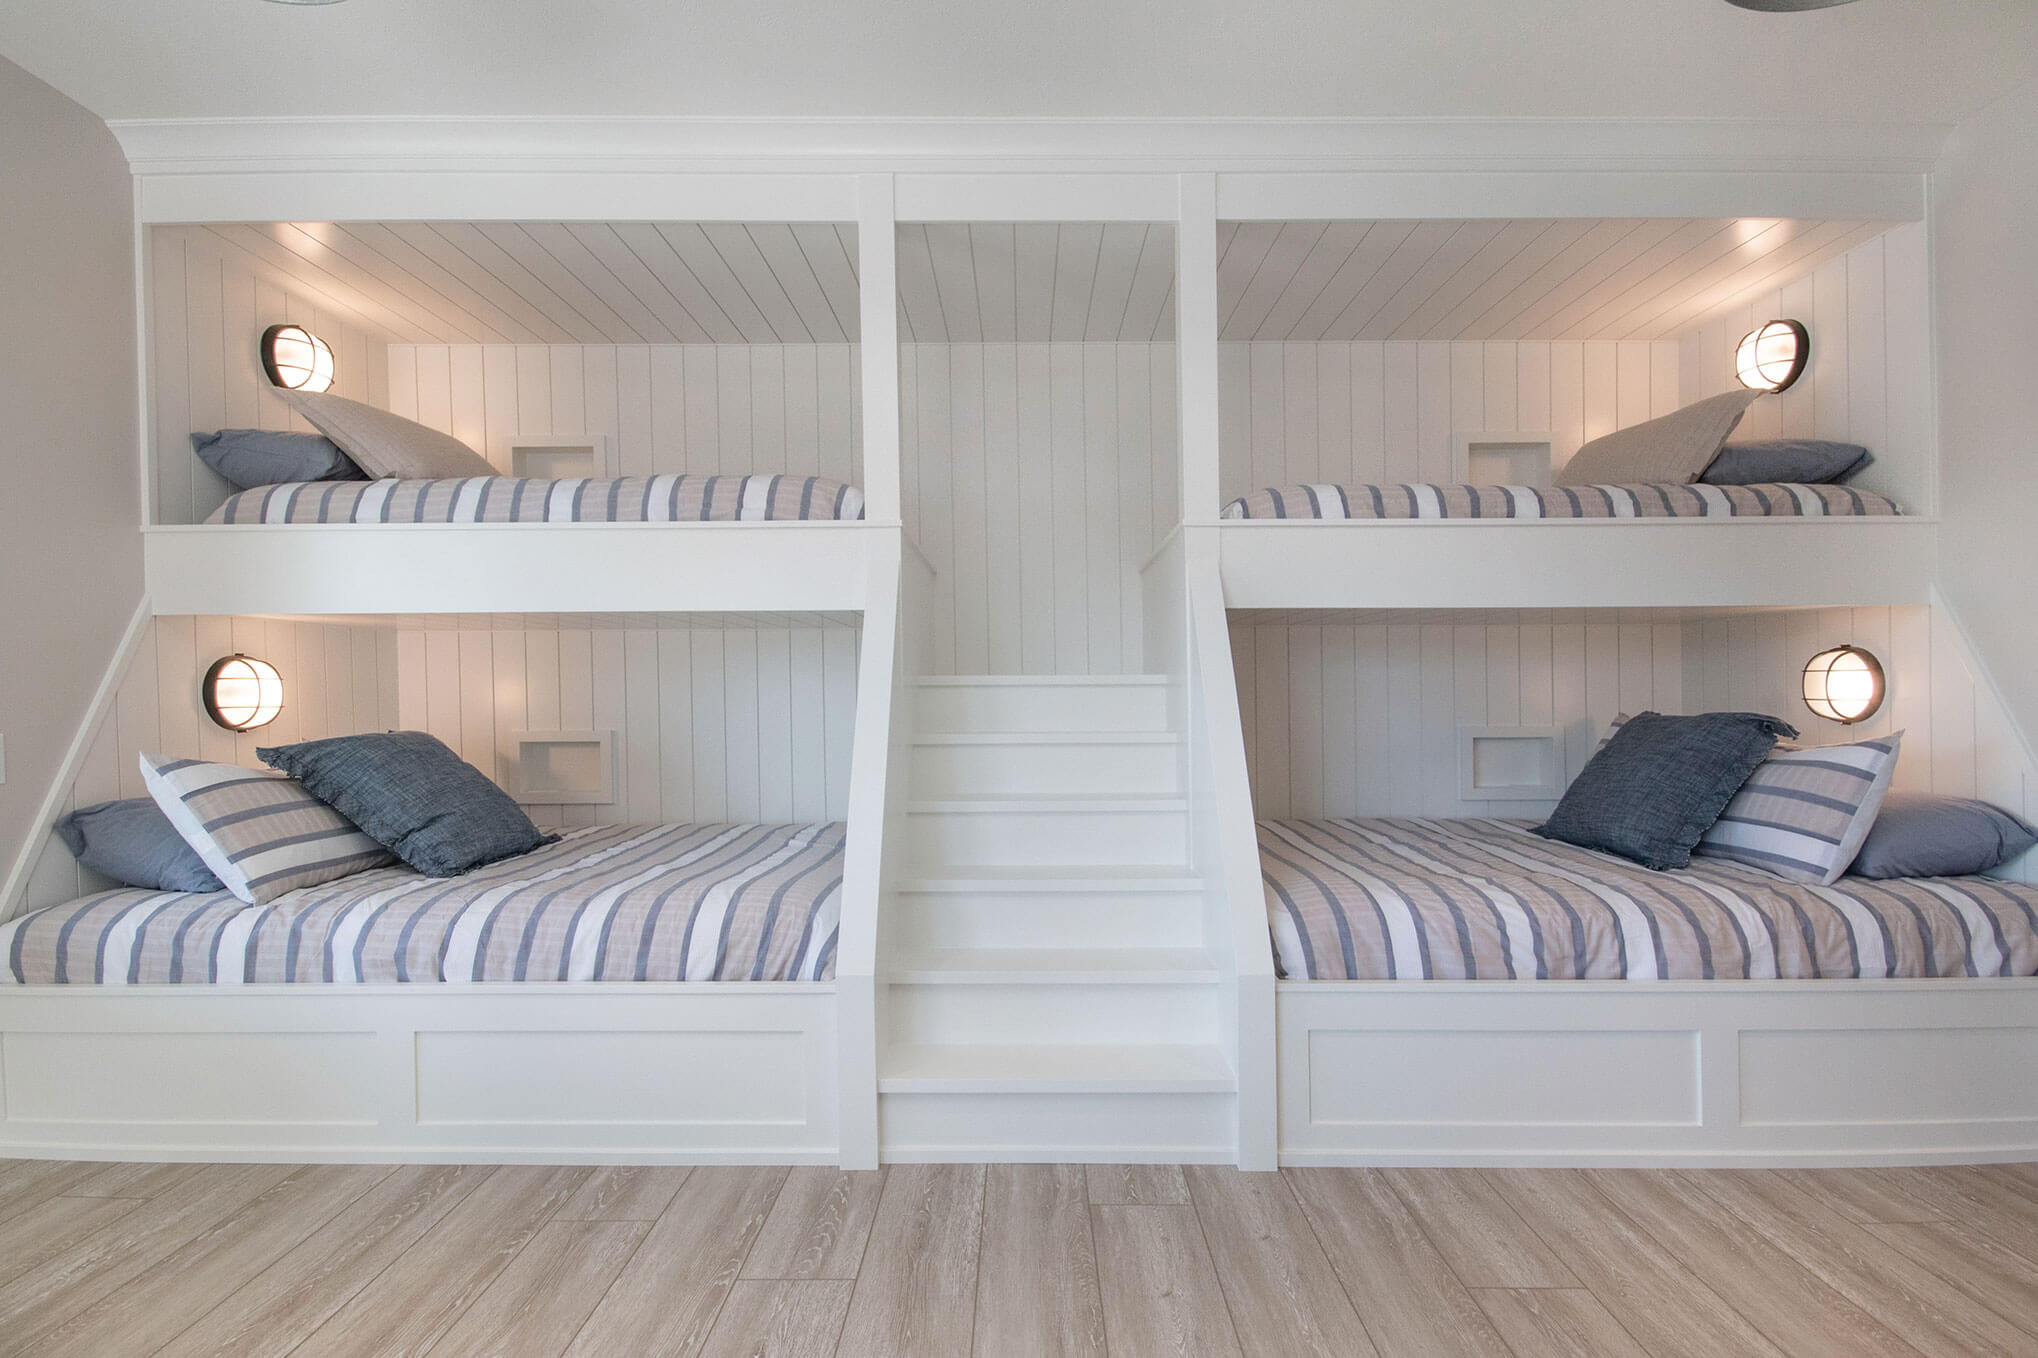 25 Bunk Bed Ideas For Small Bedrooms, Quad Bunk Beds